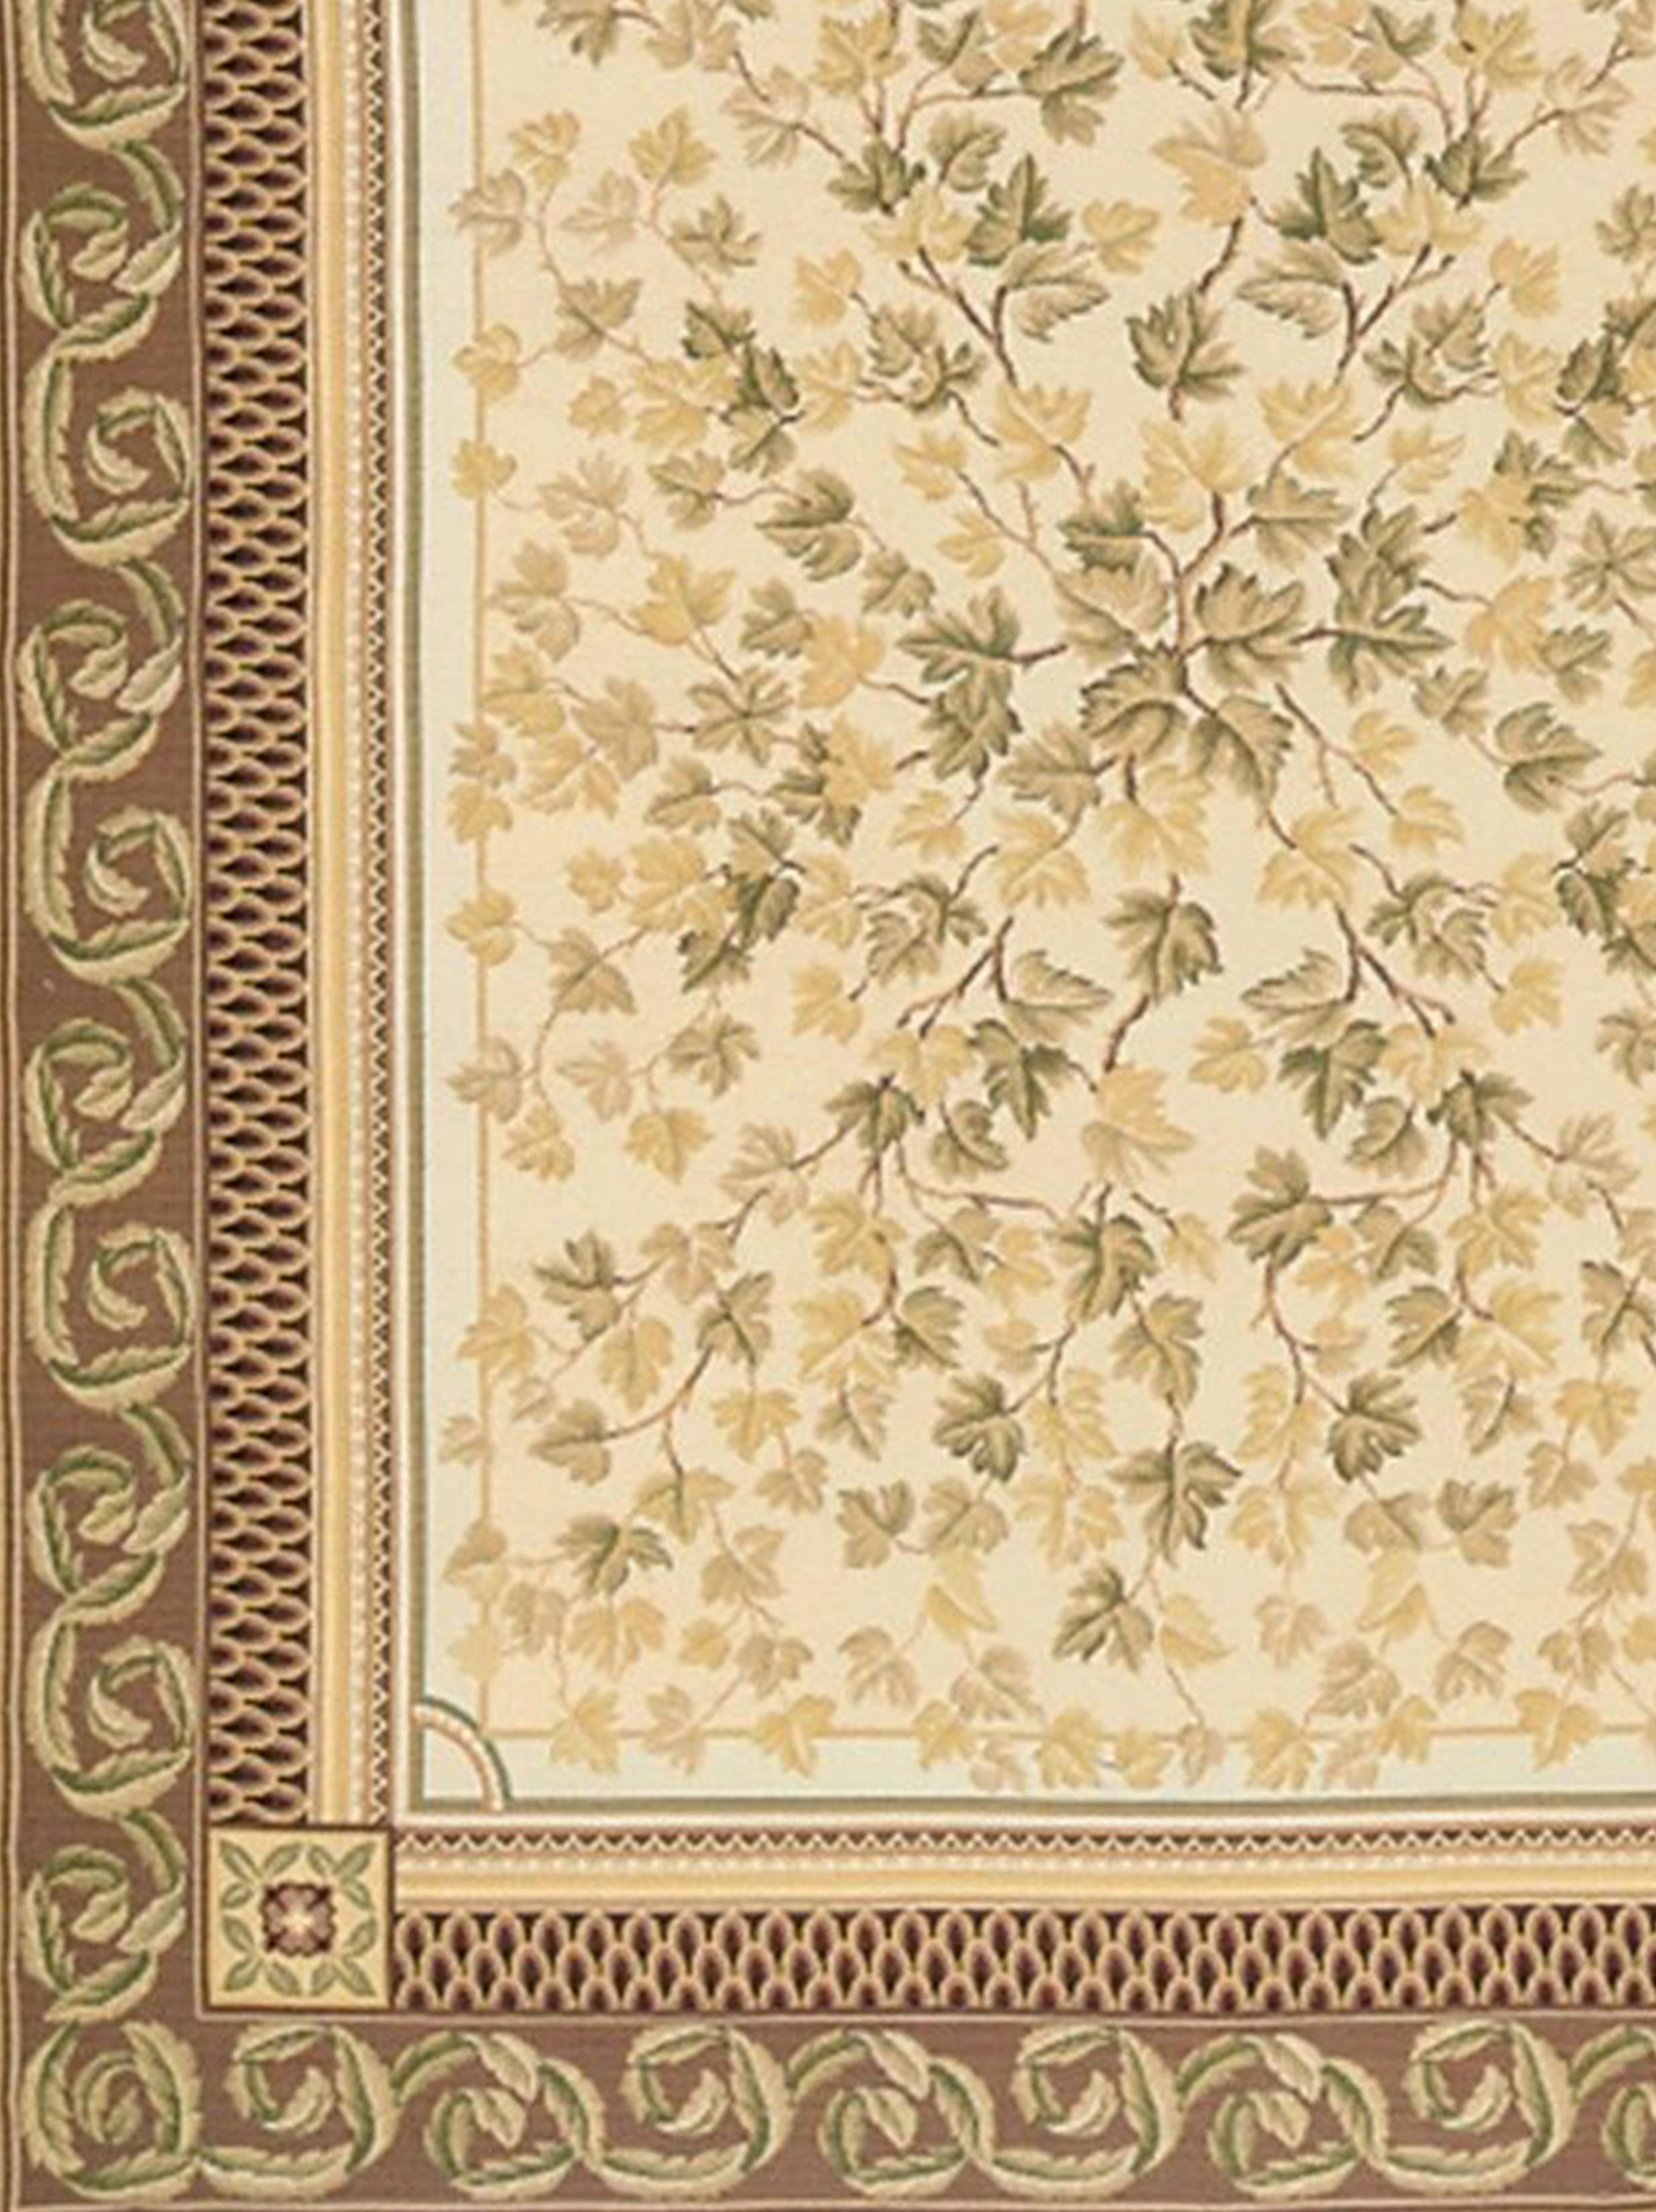 Based on an original Asmara painting by Elizabeth Moisan inspired by an Italian painted ceiling and ceiling decorations in Mark Twain's Connecticut house. Autumn branches, laden with gold and sage leaves, stretch across a cream ground surrounded by